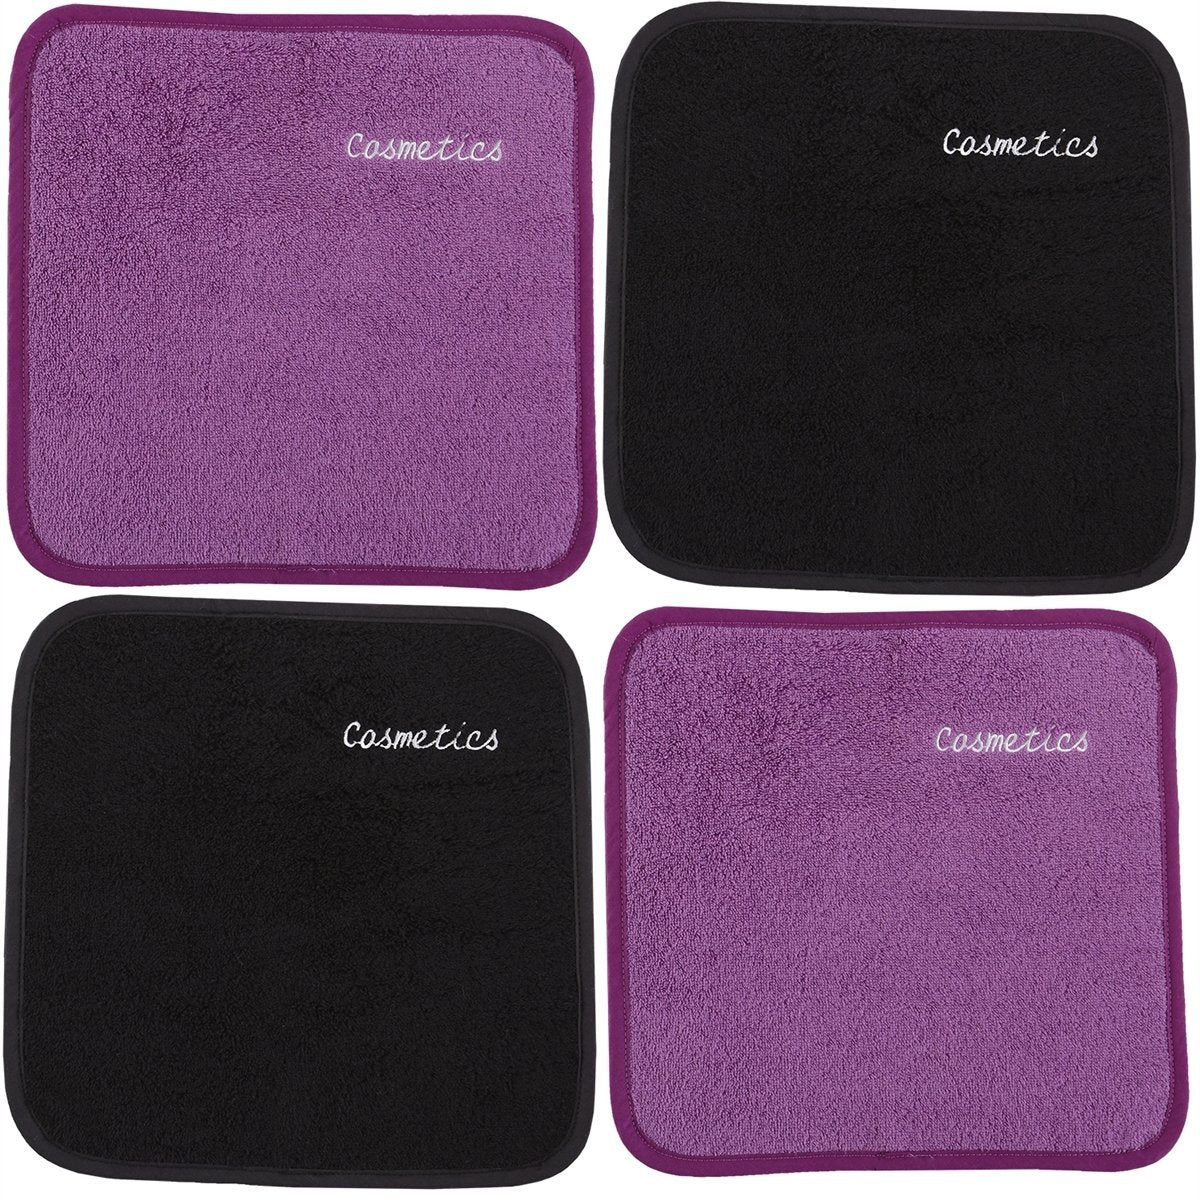 Parador® Chic Embroidered Cosmetics Removal Facecloths Set of 4, Embroidered Makeup Towels 13